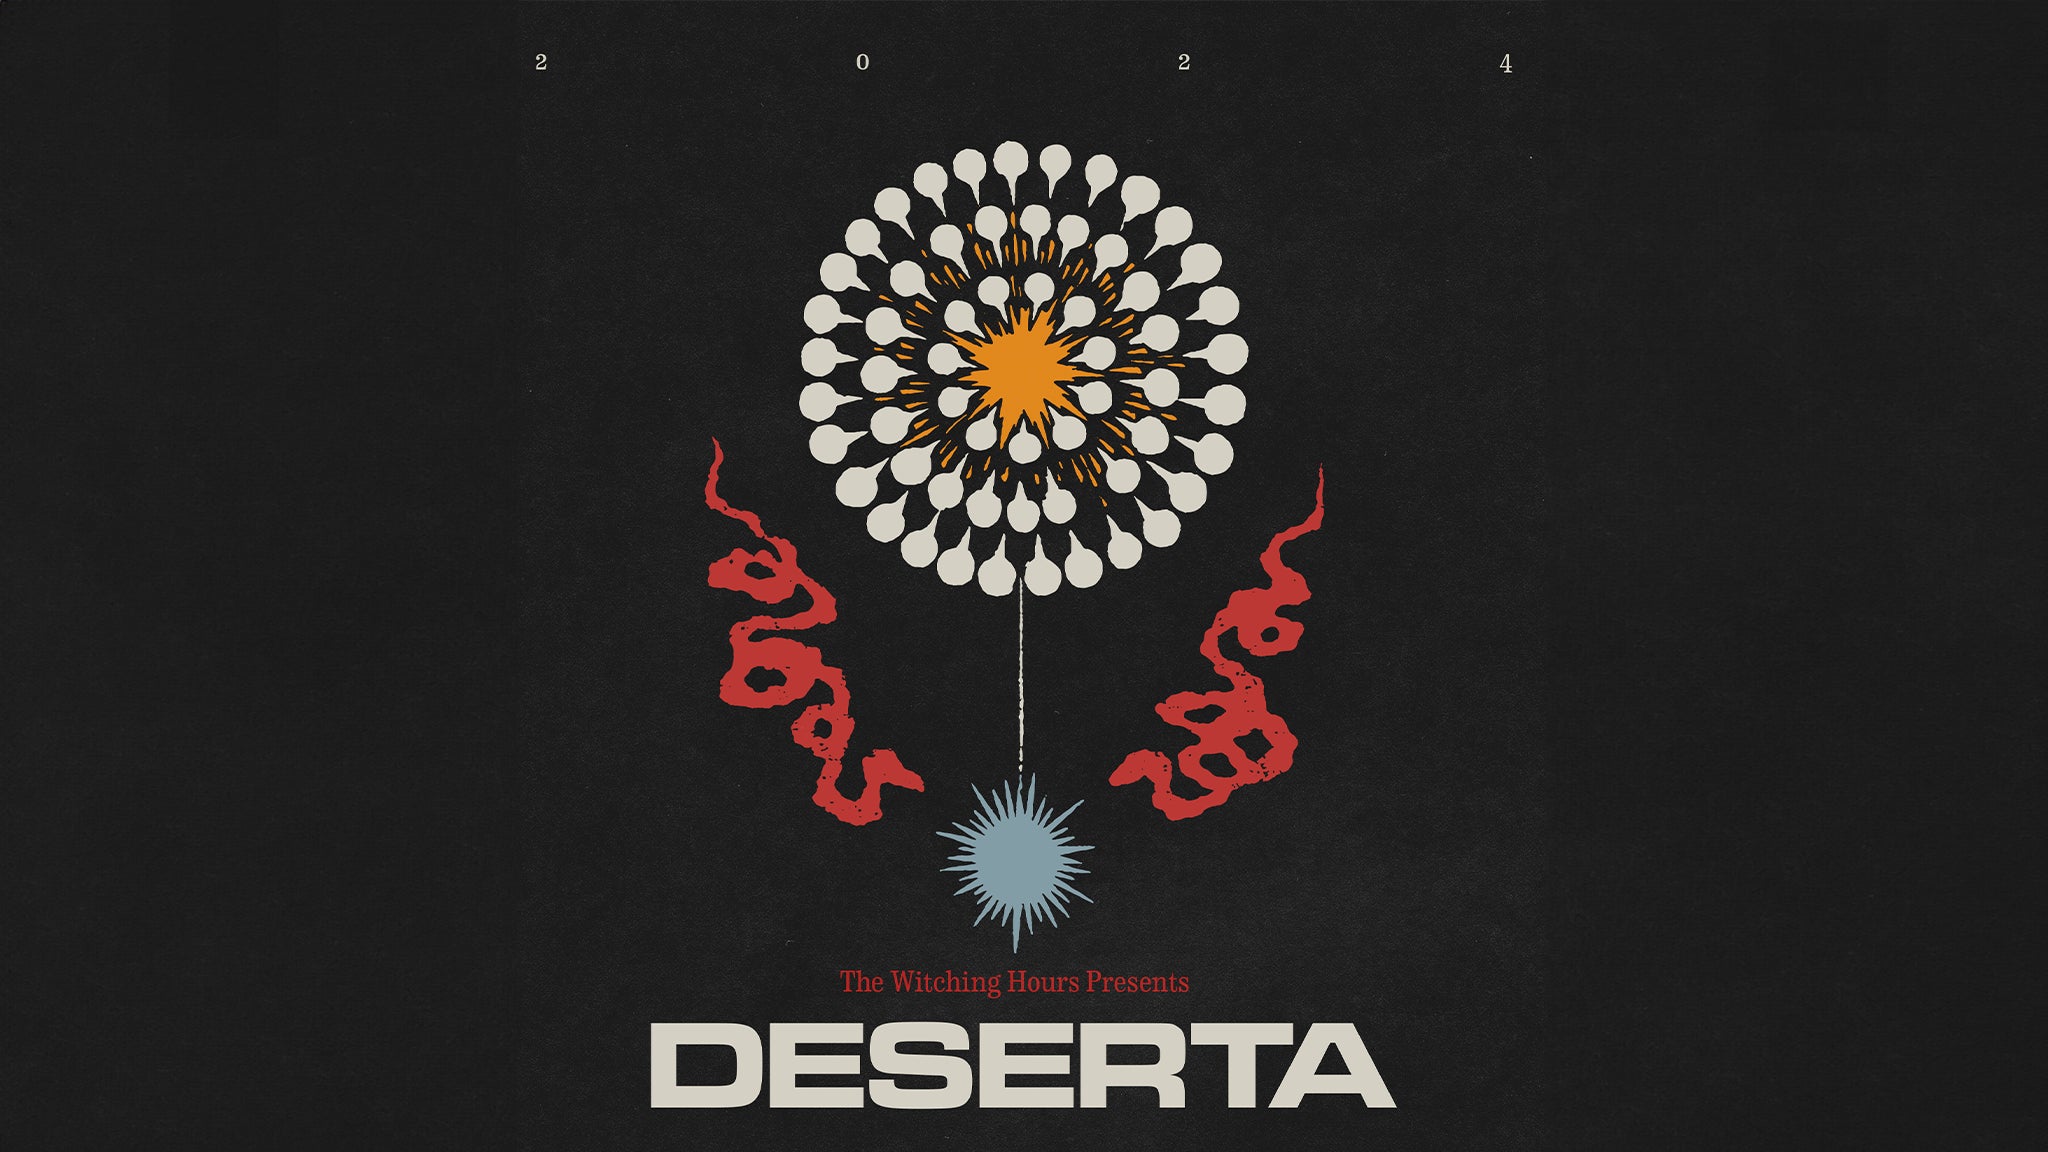 The Witching Hours Presents: Deserta